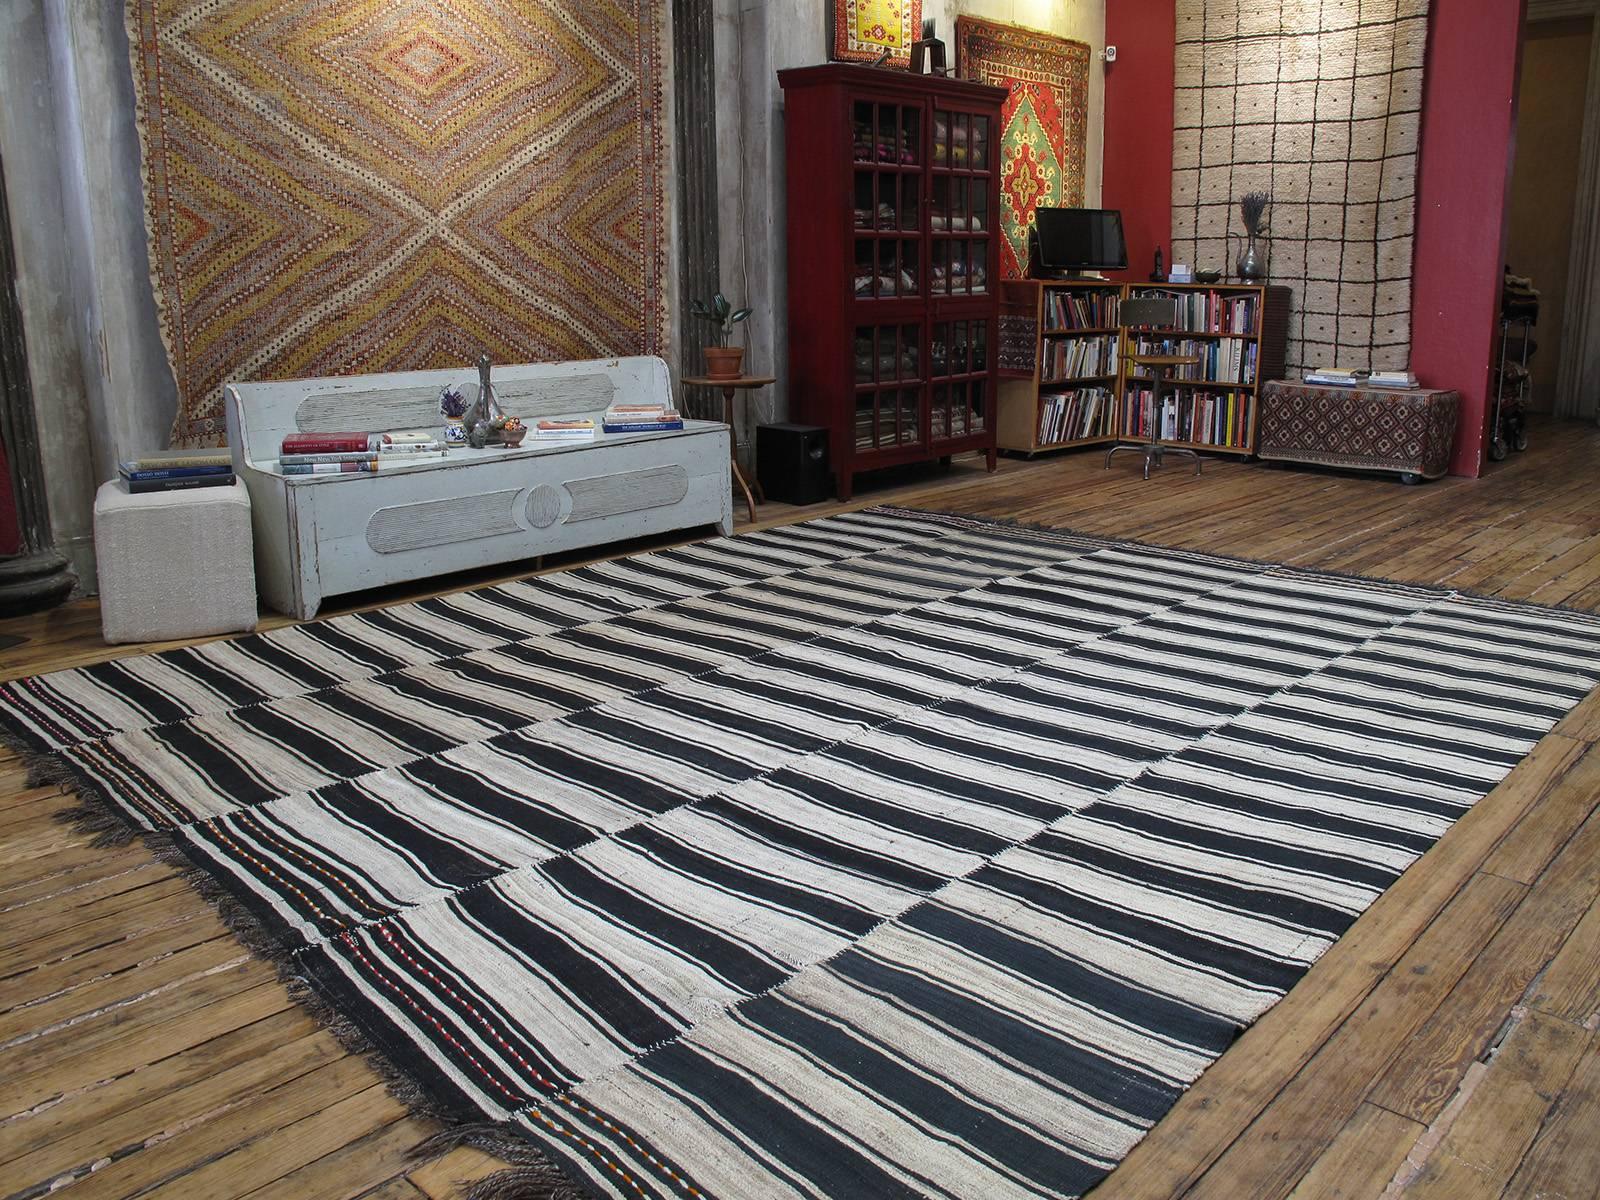 This large tribal Kilim from Northern Iran was woven in five narrow panels on a narrow loom, with alternating bands of black-brown and ivory. Note the pleasing tonal variations in the close-up photos, lending depth and character to this authentic